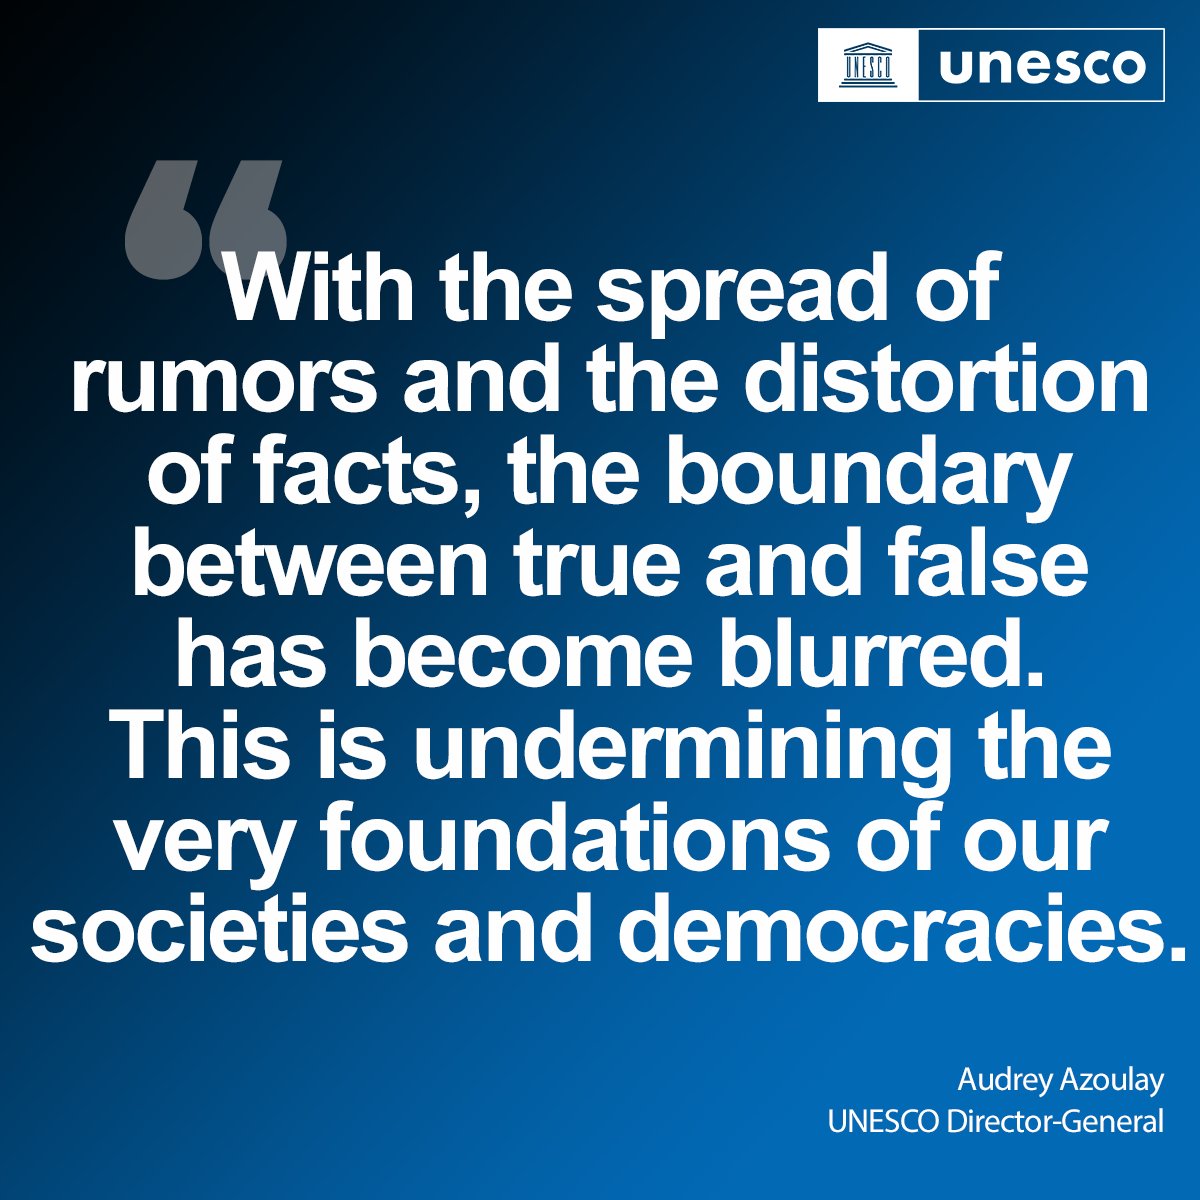 The lack of verified & quality information threatens the very foundations of society and democracy.

More than ever, we need media & information literacy to counter disinformation.

How #GlobalMILWeek tackles digital challenges: on.unesco.org/2BEmVdC #ThinkBeforeSharing